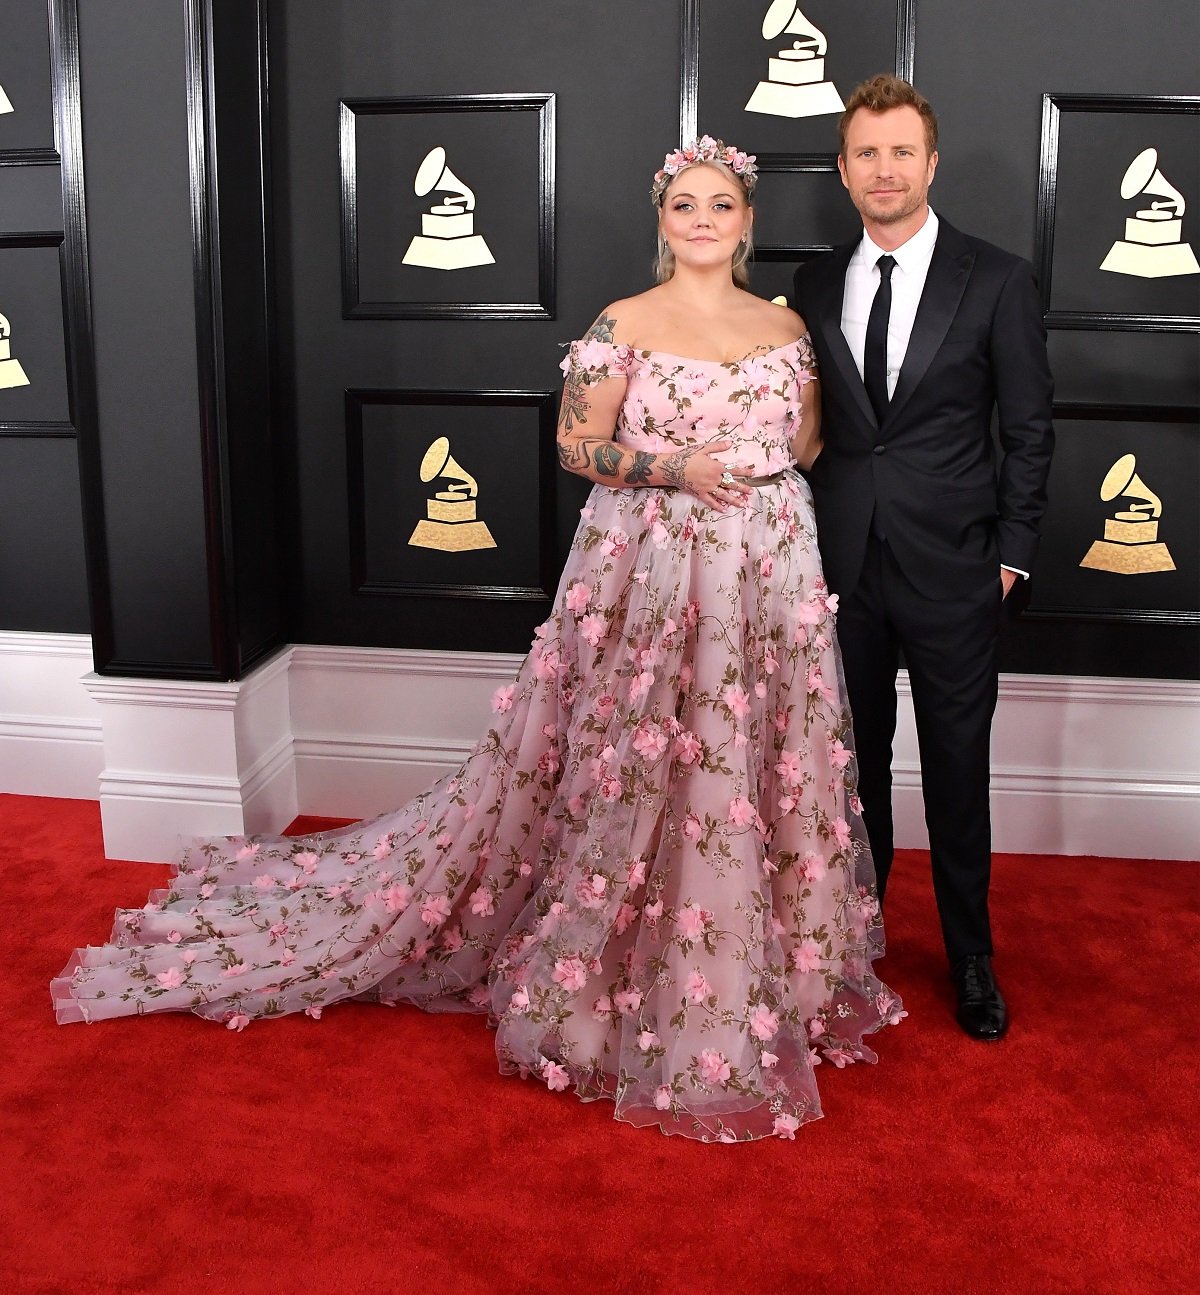 Elle King, in a Lirika Matoshi floral gown, and Dierks Bentley on the red carpet at the 2017 Grammys